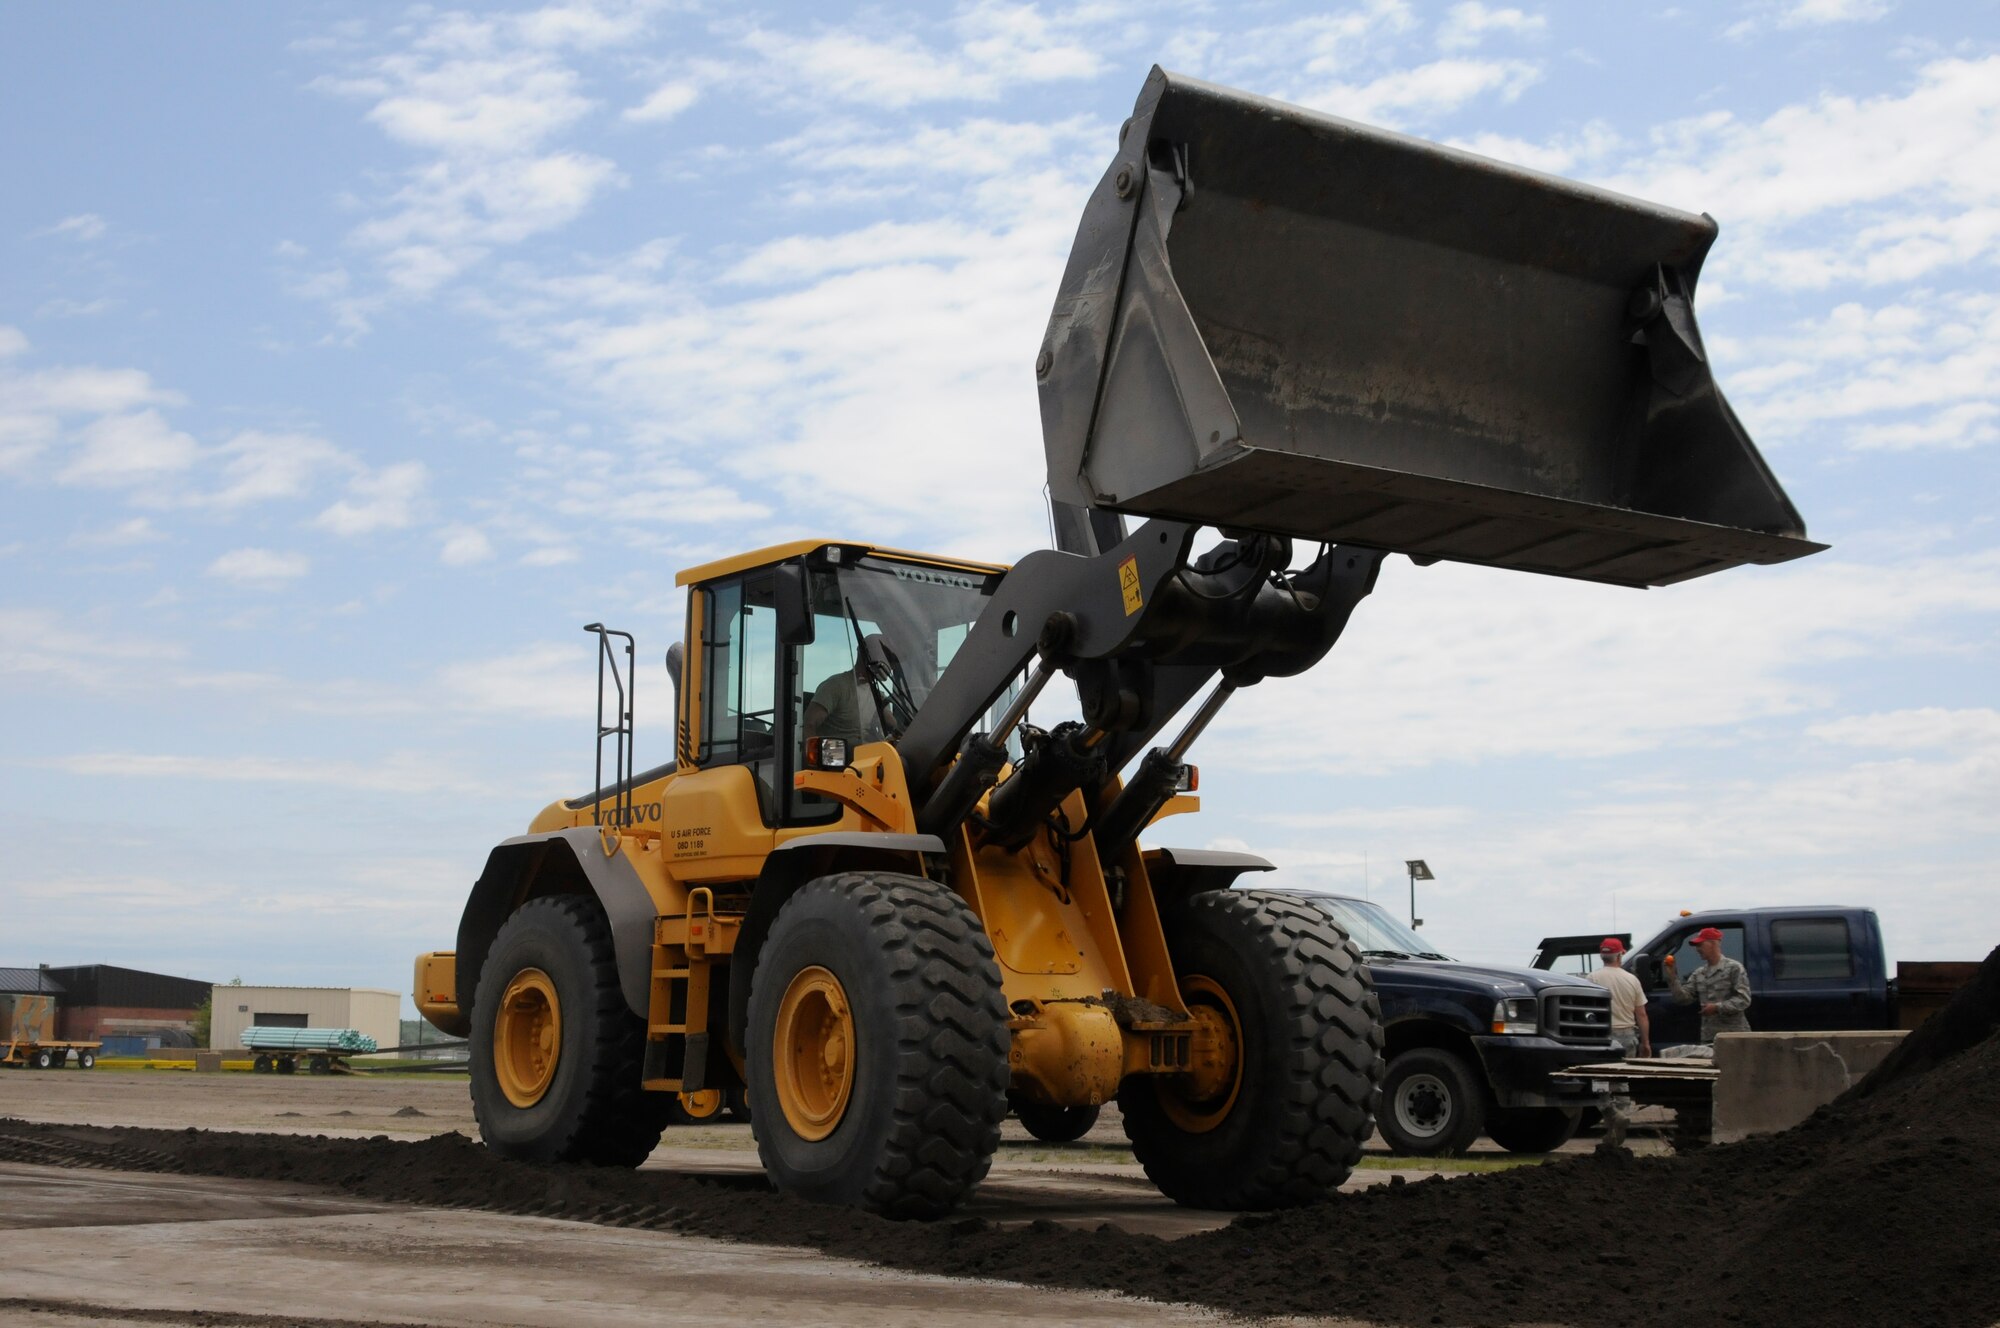 Master Sgt. Bryan Sutton prepares to load crusher dust at Ebbing Air National Guard Base, Ark., during annual training, April 21, 2015. Crusher dust is utilized during asphalt training to teach the proper techniques and procedures when laying asphalt. Sutton is assigned to the 188th Civil Engineer Squadron. (U.S. Air National Guard photo by Staff Sgt. Hannah Dickerson/released)